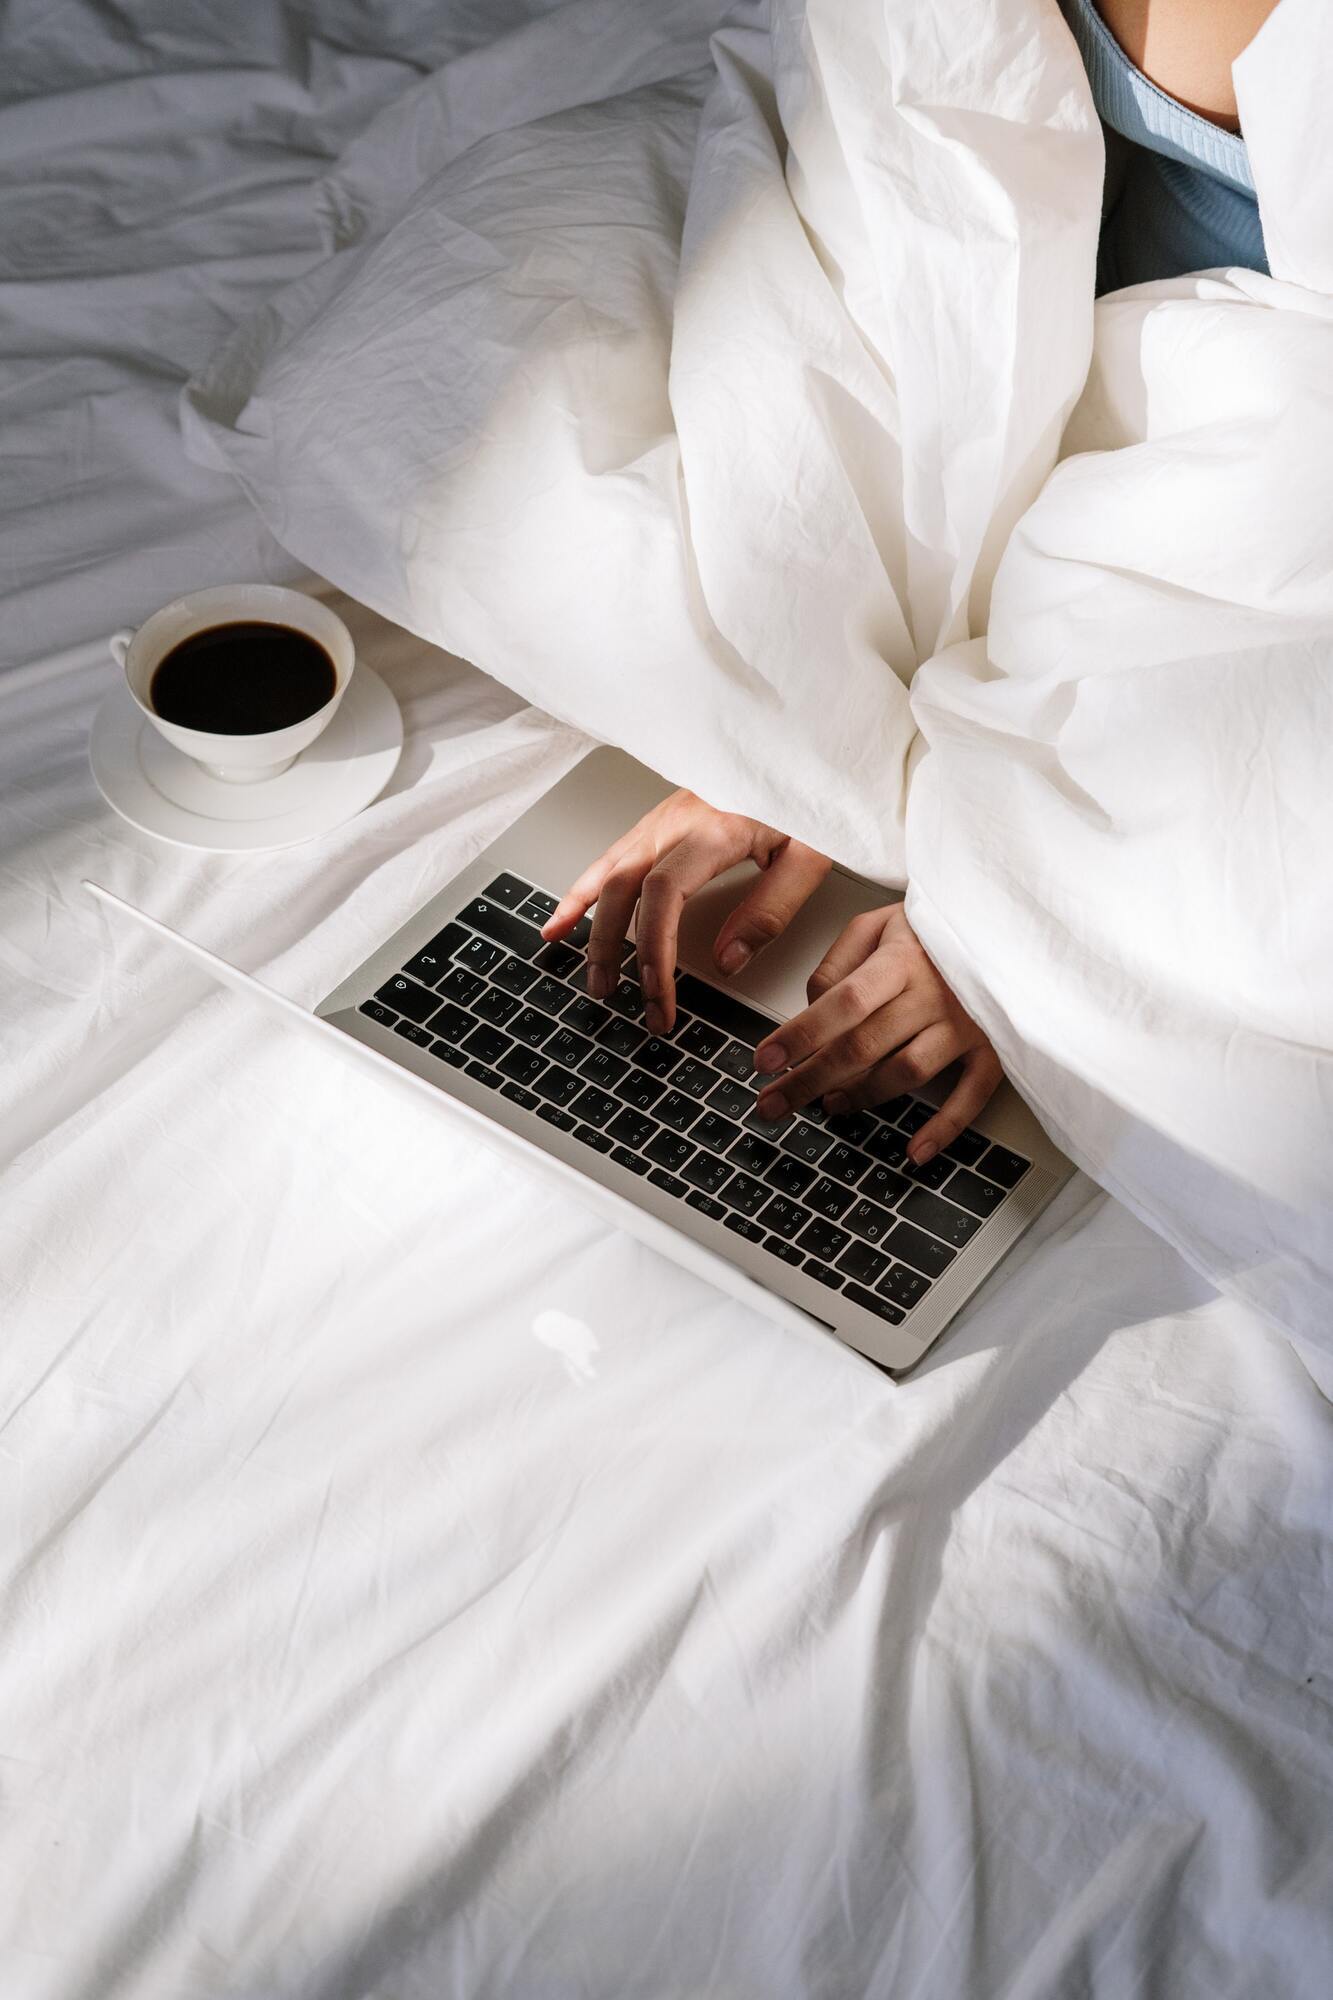 For remote work, it's better to create a special place than to sit in bed all day